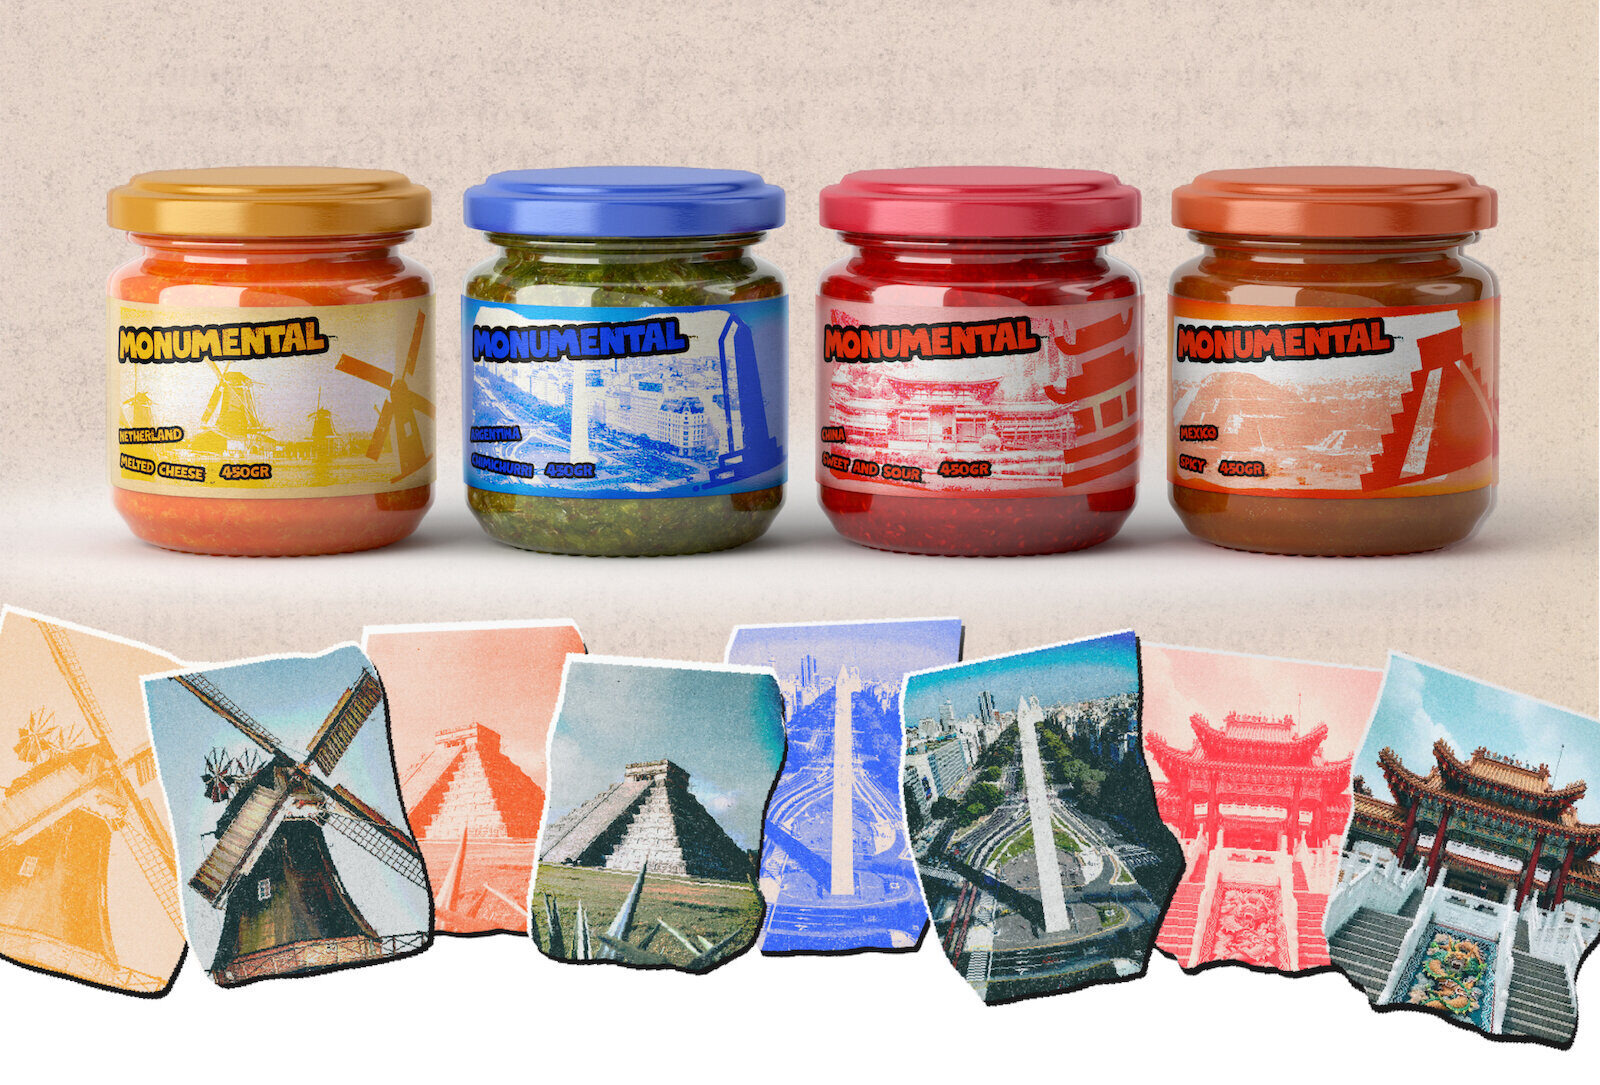 4 diffetent jars sauce. orange, blue and green, pink and red. Below 8 pictures of dirferent places